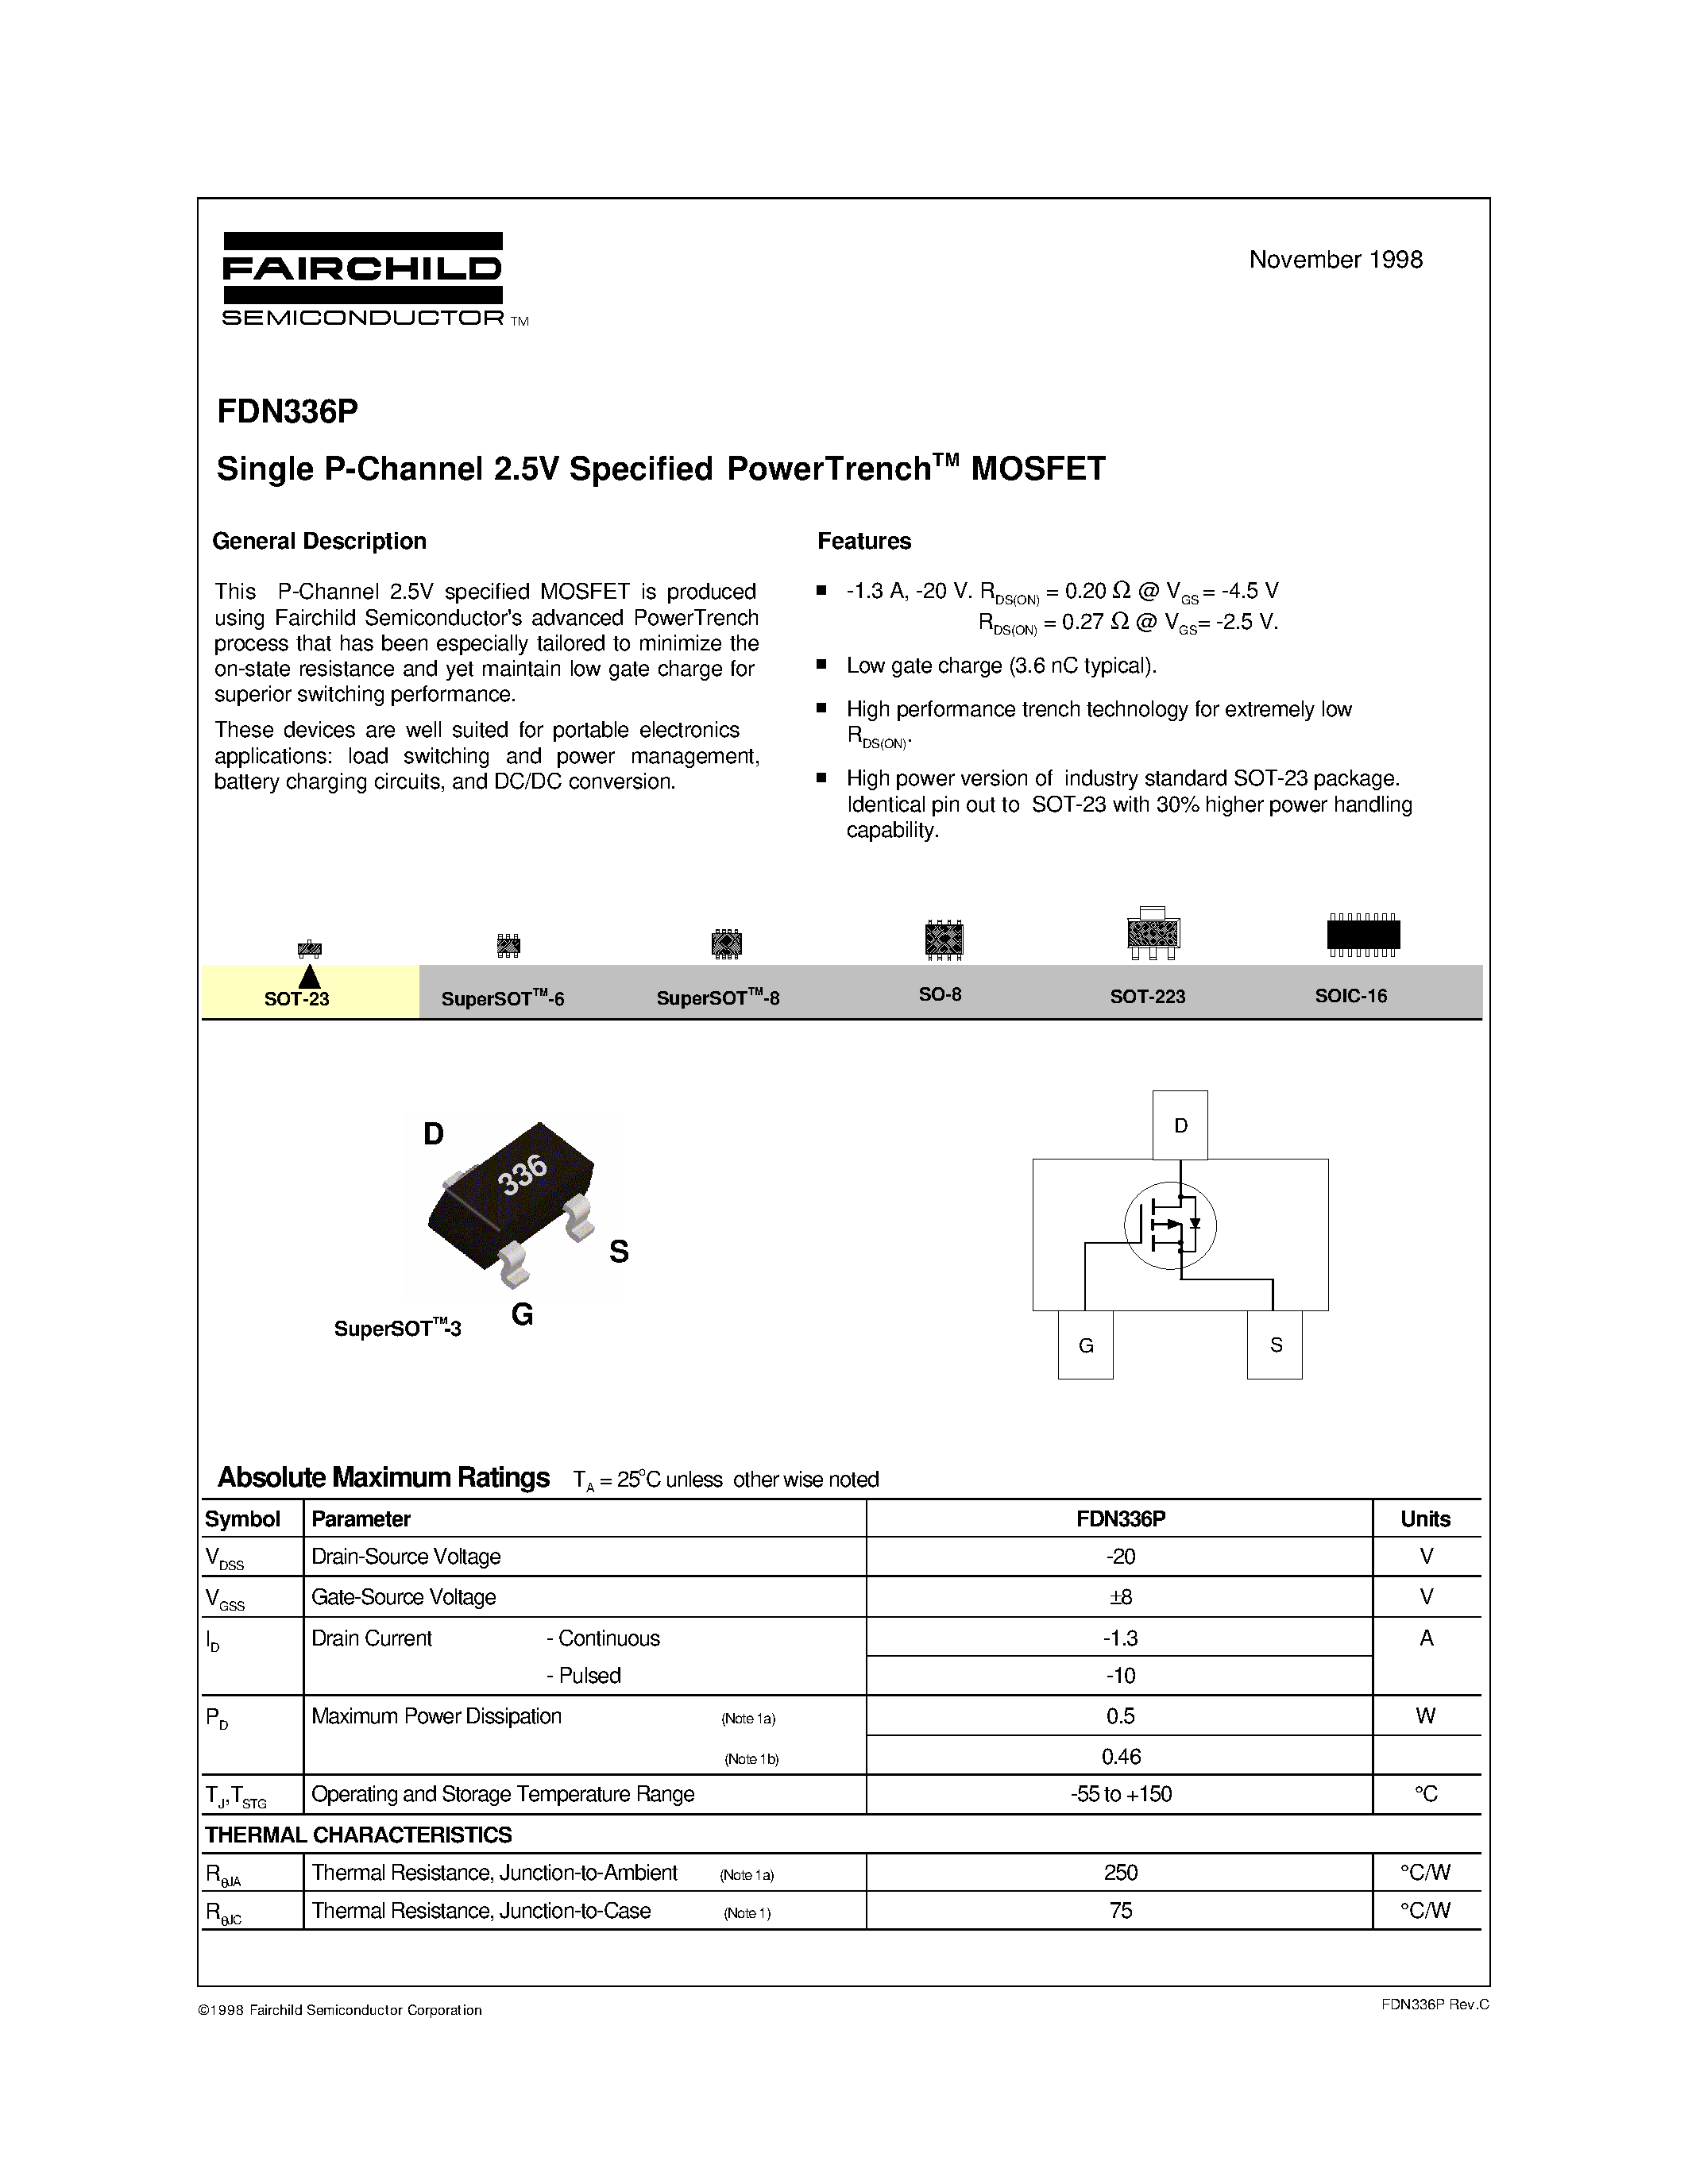 Даташит FDN336 - Single P-Channel 2.5V Specified PowerTrenchTM MOSFET страница 1